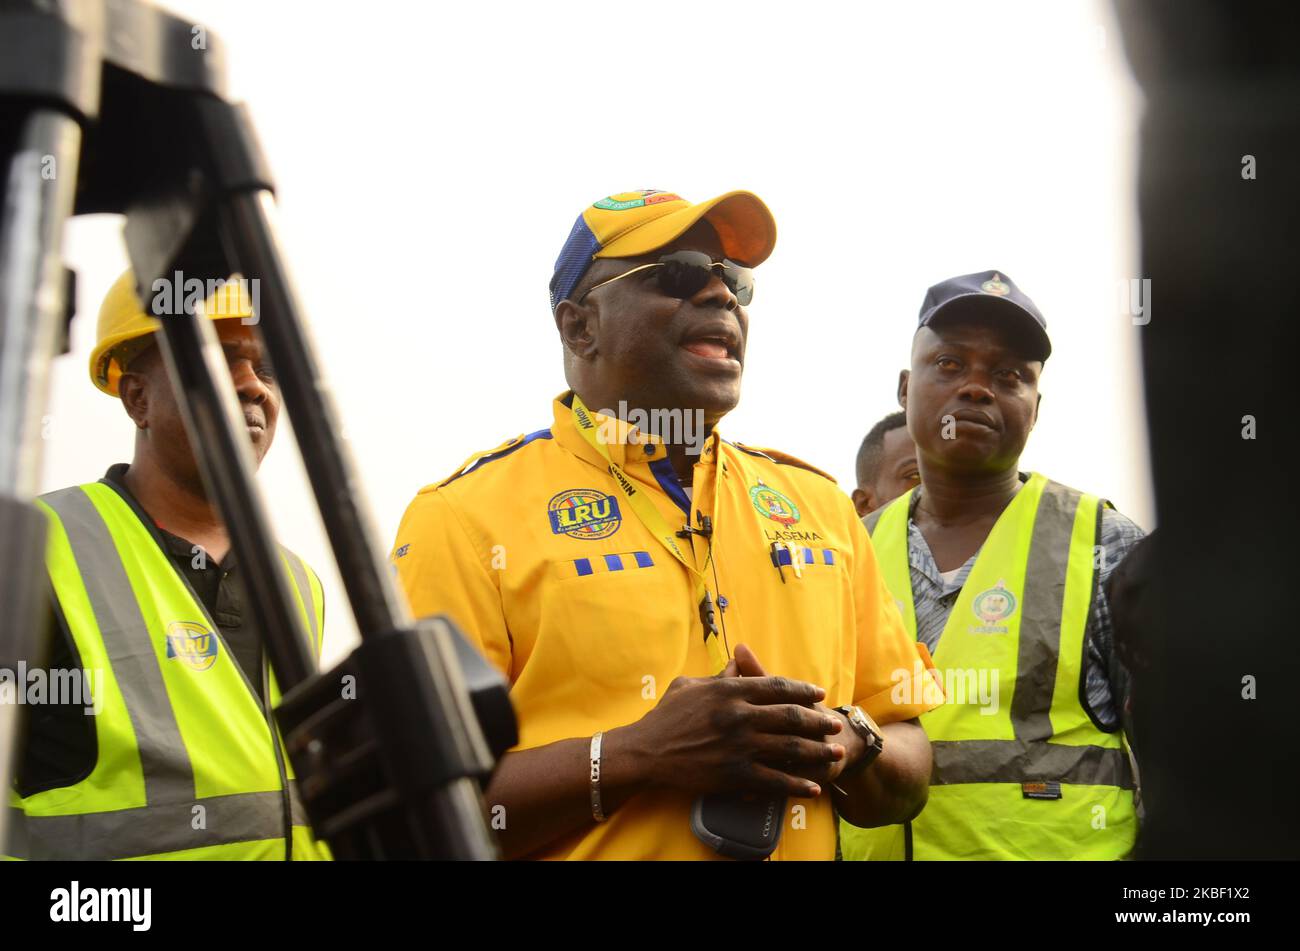 Director General of Lagos state Emergency Management Agency, Olufemi Oke-Osayintolu addressing journalist at the scene, after a pipeline explosion that rocked the Ekoro area of Abule-Egba, Lagos State, on Sunday, January 19, 2020. Five people were killed, 39 vehicles razed, and several shops and 150 people displaced in Lagos pipeline explosion after thieves breached a fuel pipeline in Lagos, Nigeria's commercial hub, causing an explosion. (Photo by Olukayode Jaiyeola/NurPhoto) Stock Photo